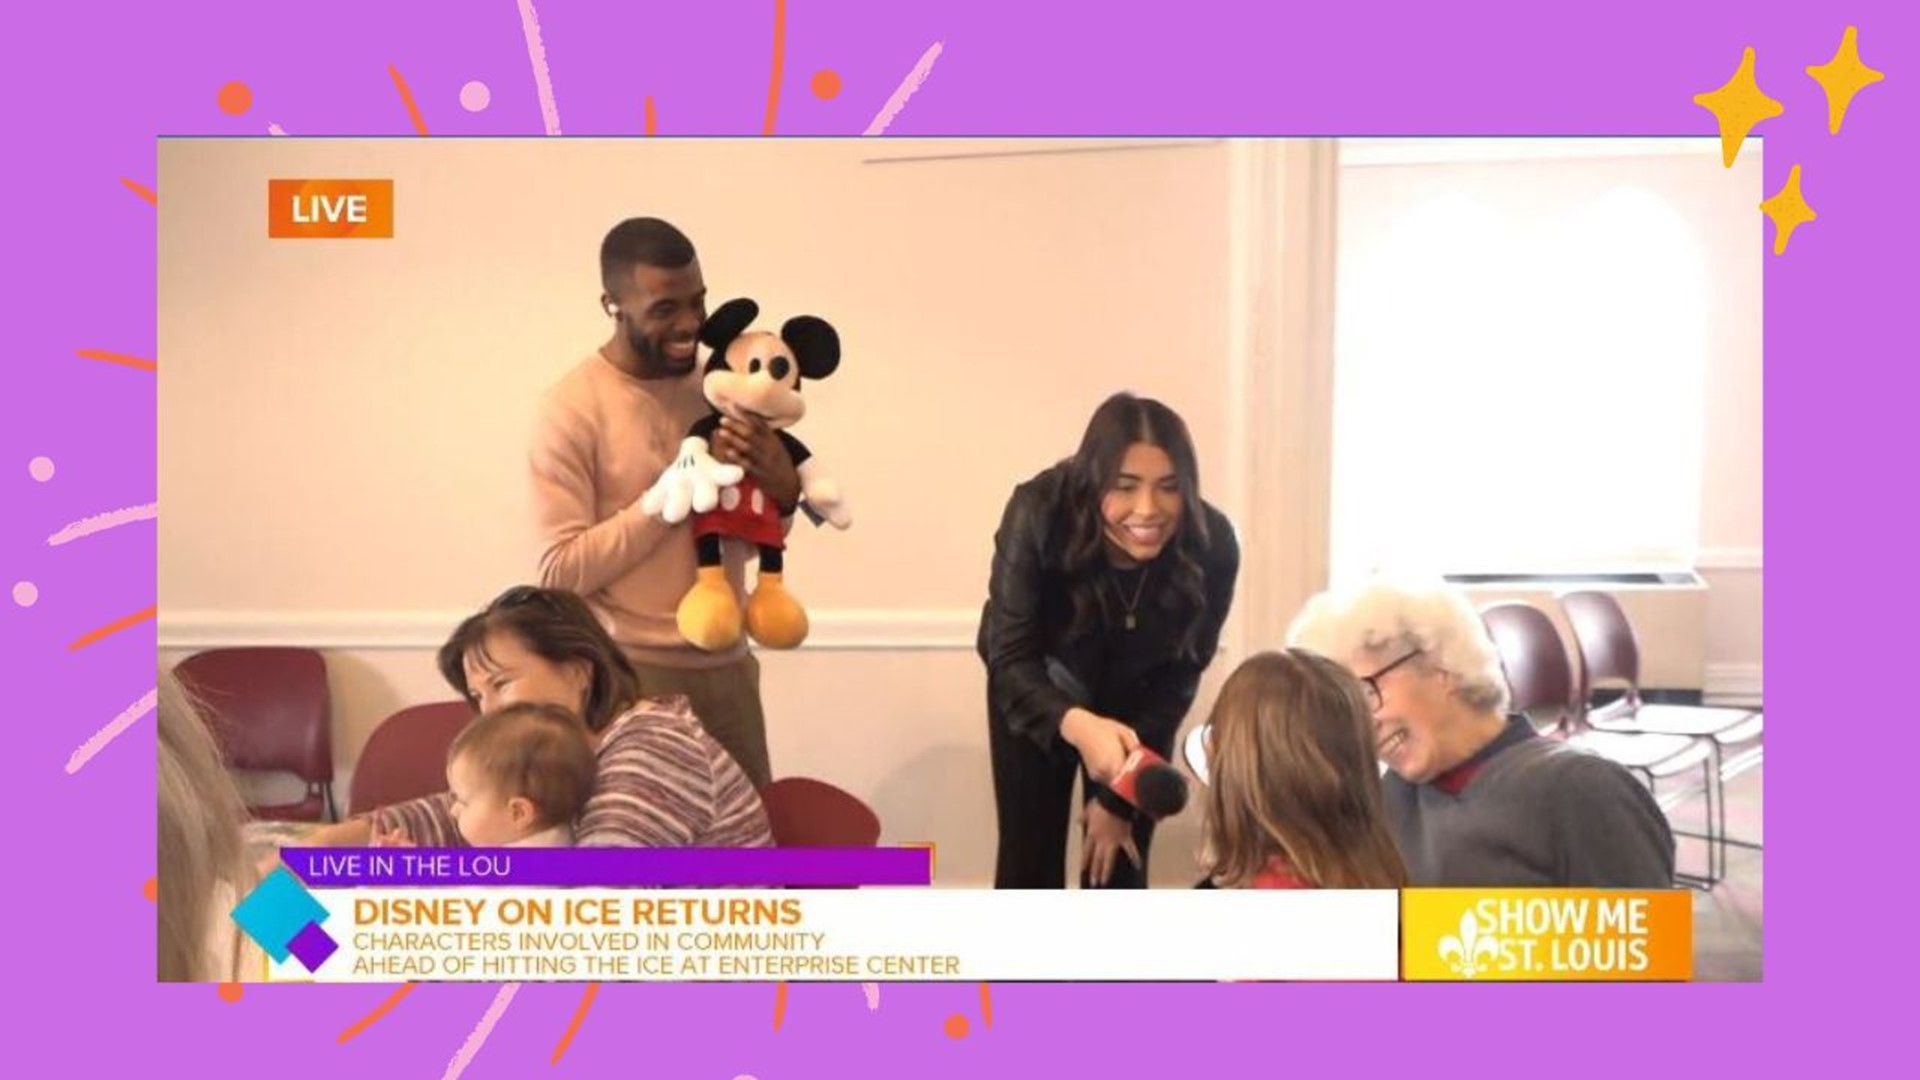 Dana DiPiazza and Malik Wilson spent the morning with special stars to celebrate Disney’s upcoming presentation of ‘Into the Magic.’